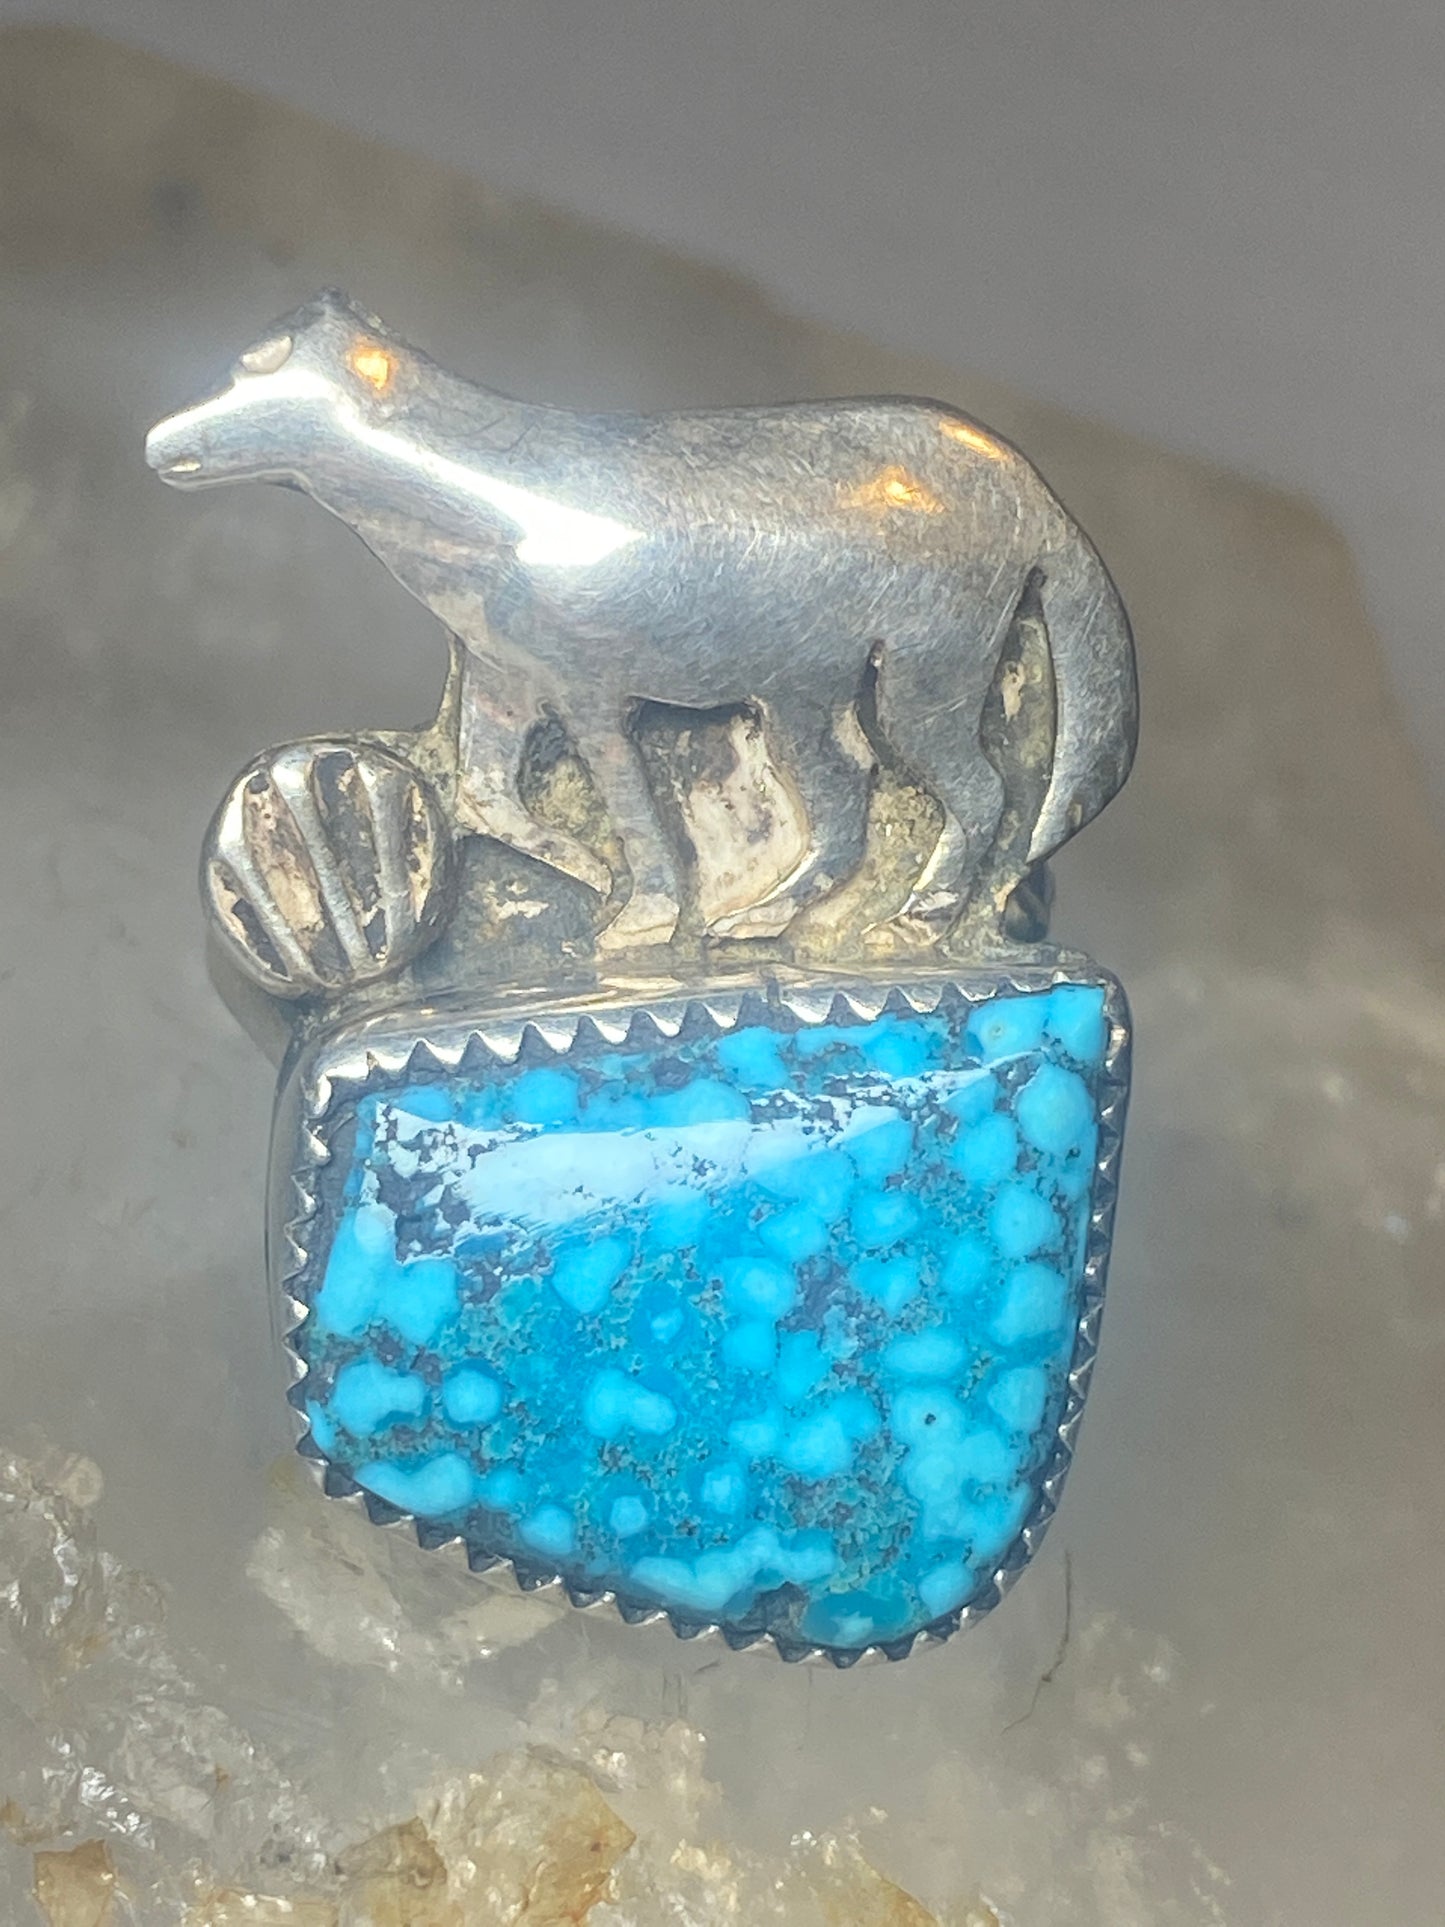 Turquoise ring wolf coyote southwest sterling silver women girls